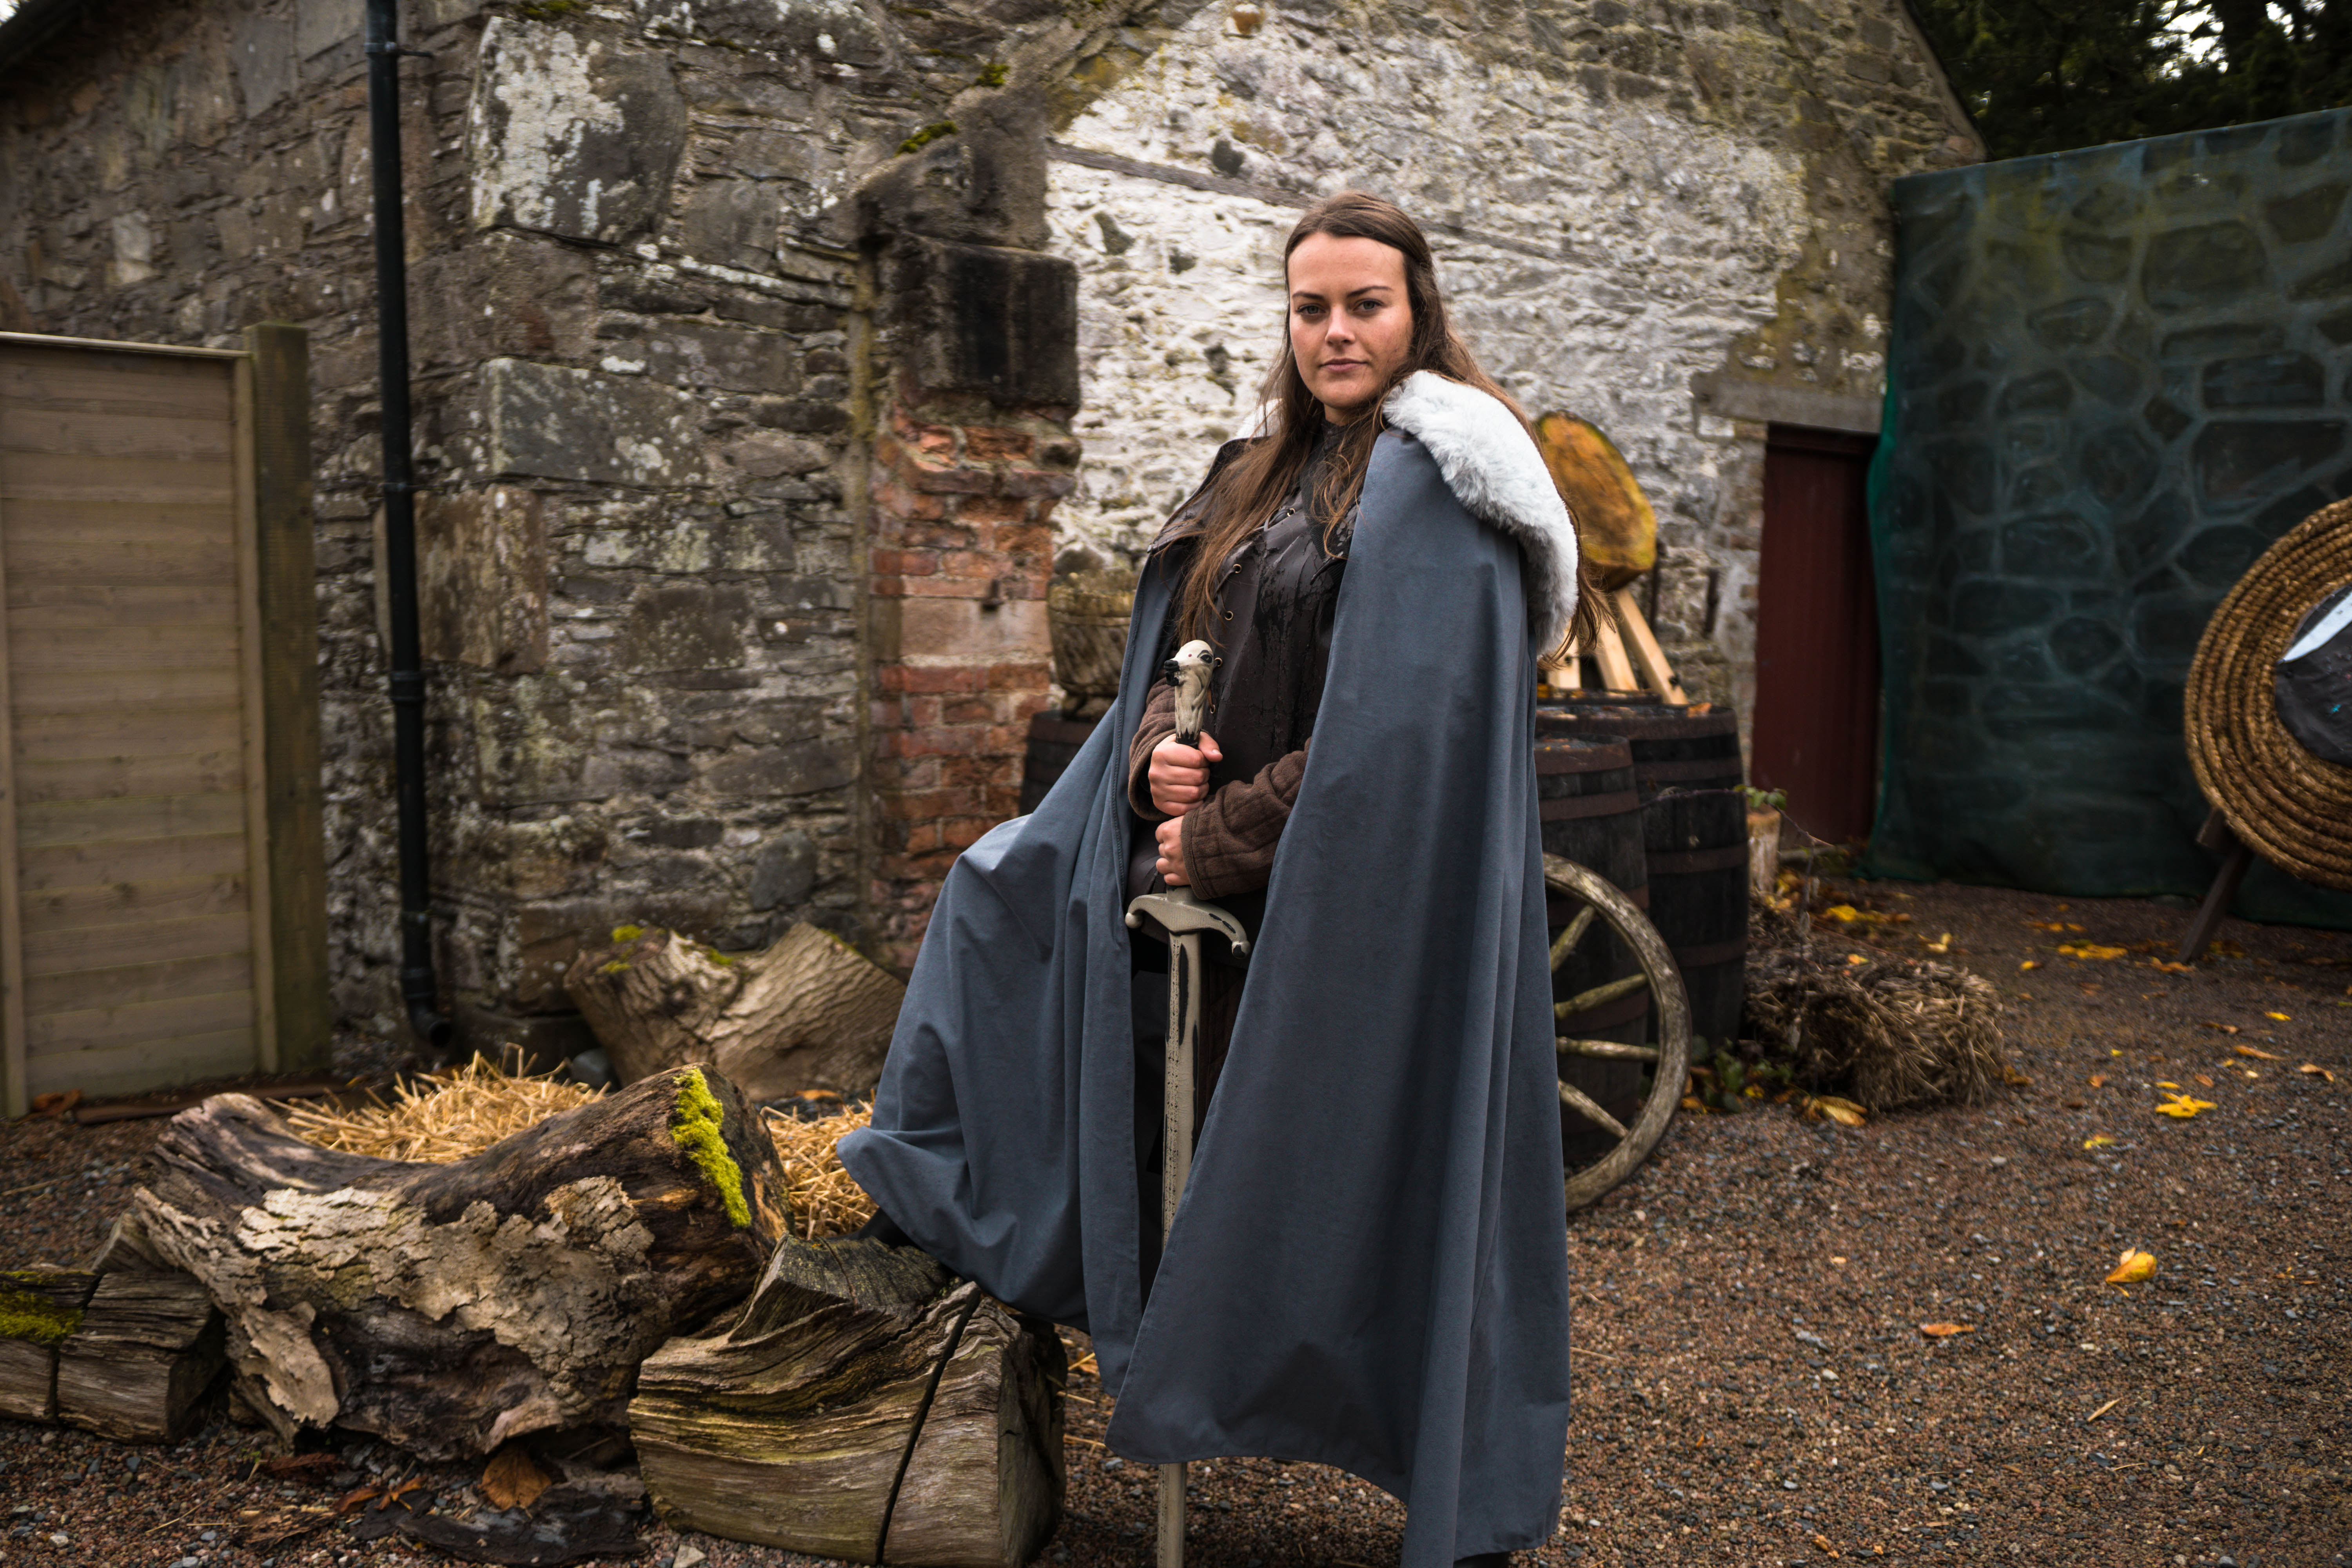 Winterfell tour Belfast: Explore the set of the Game of Thrones Winterfell Castle all while dressed up for the part!